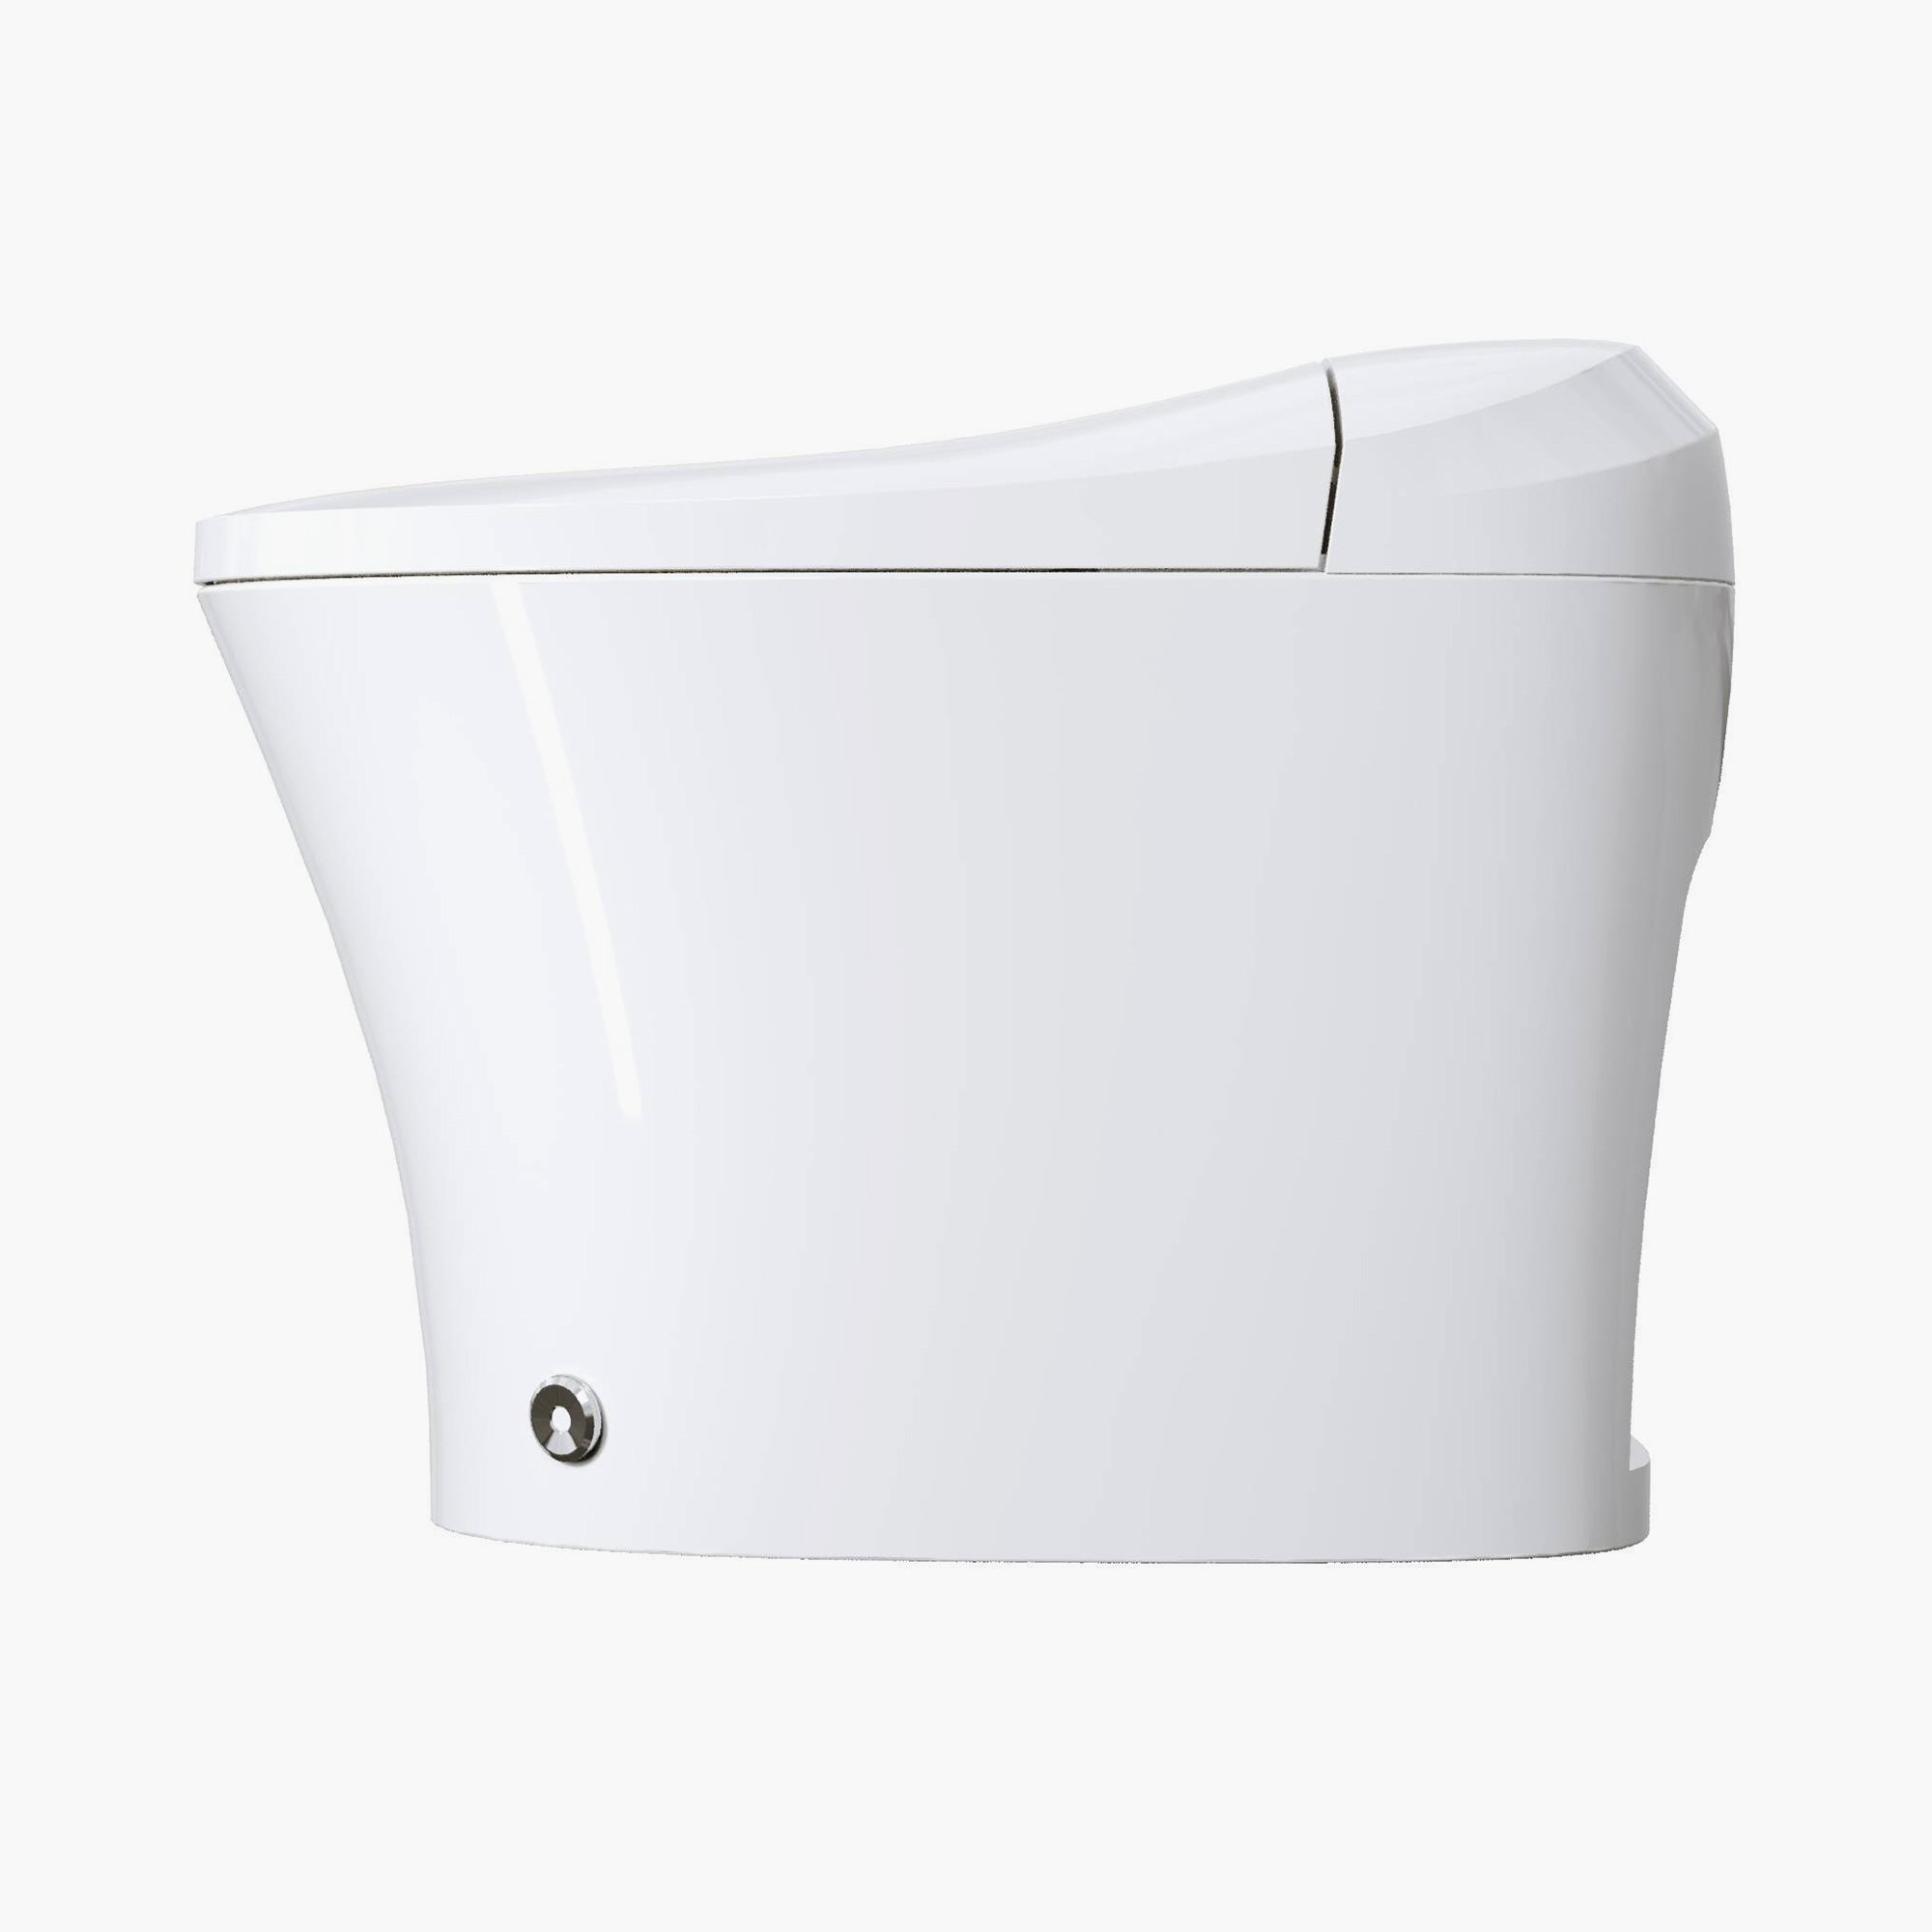 HOROW Modern Bidet Toilet With Heated and ADA Model T15A